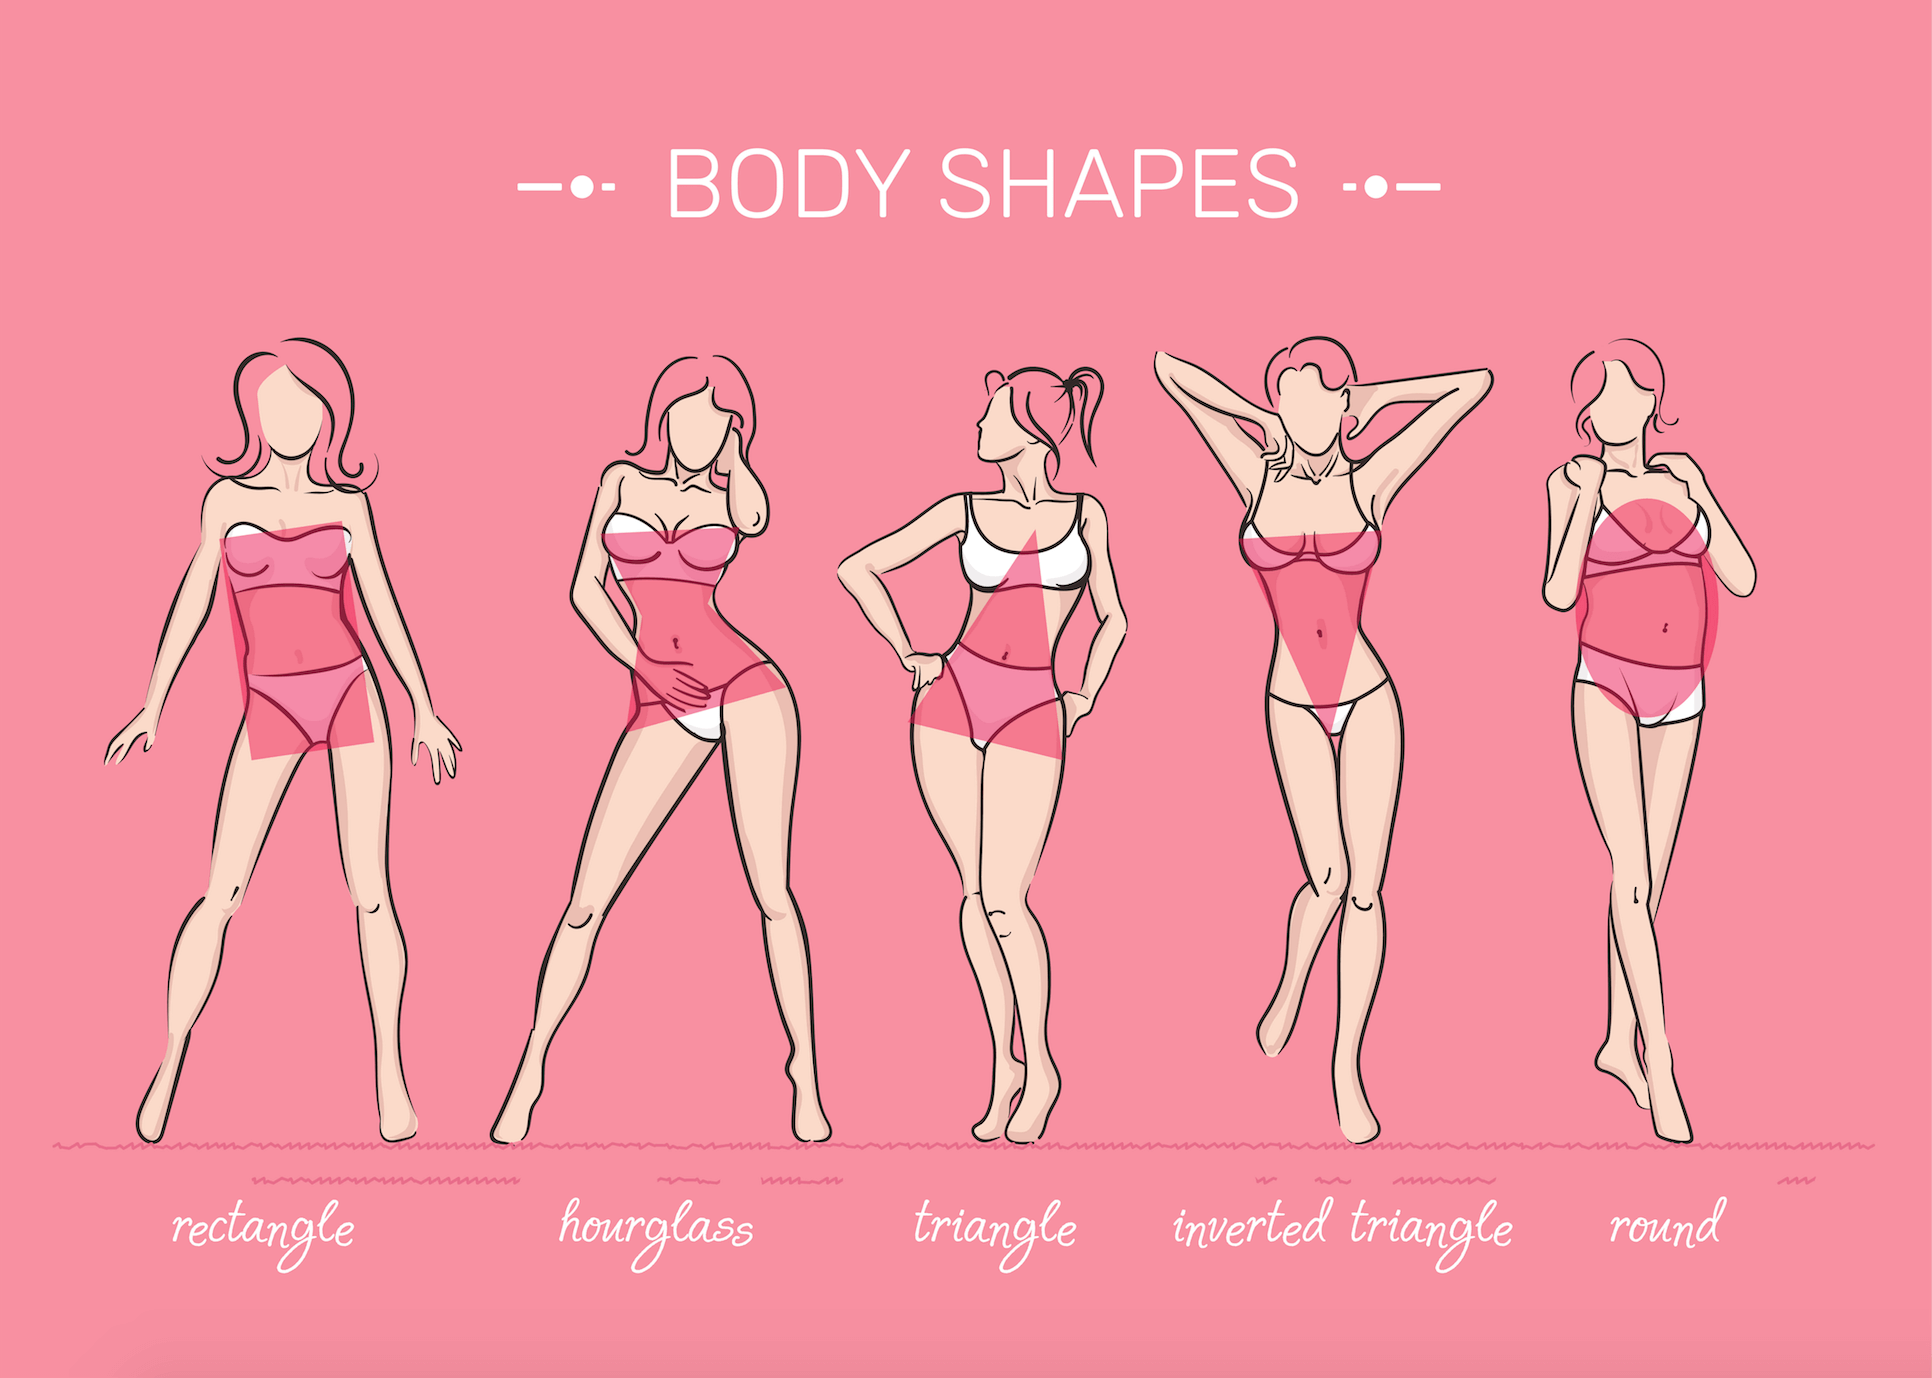 Can you identify your body shape in any of these figures?